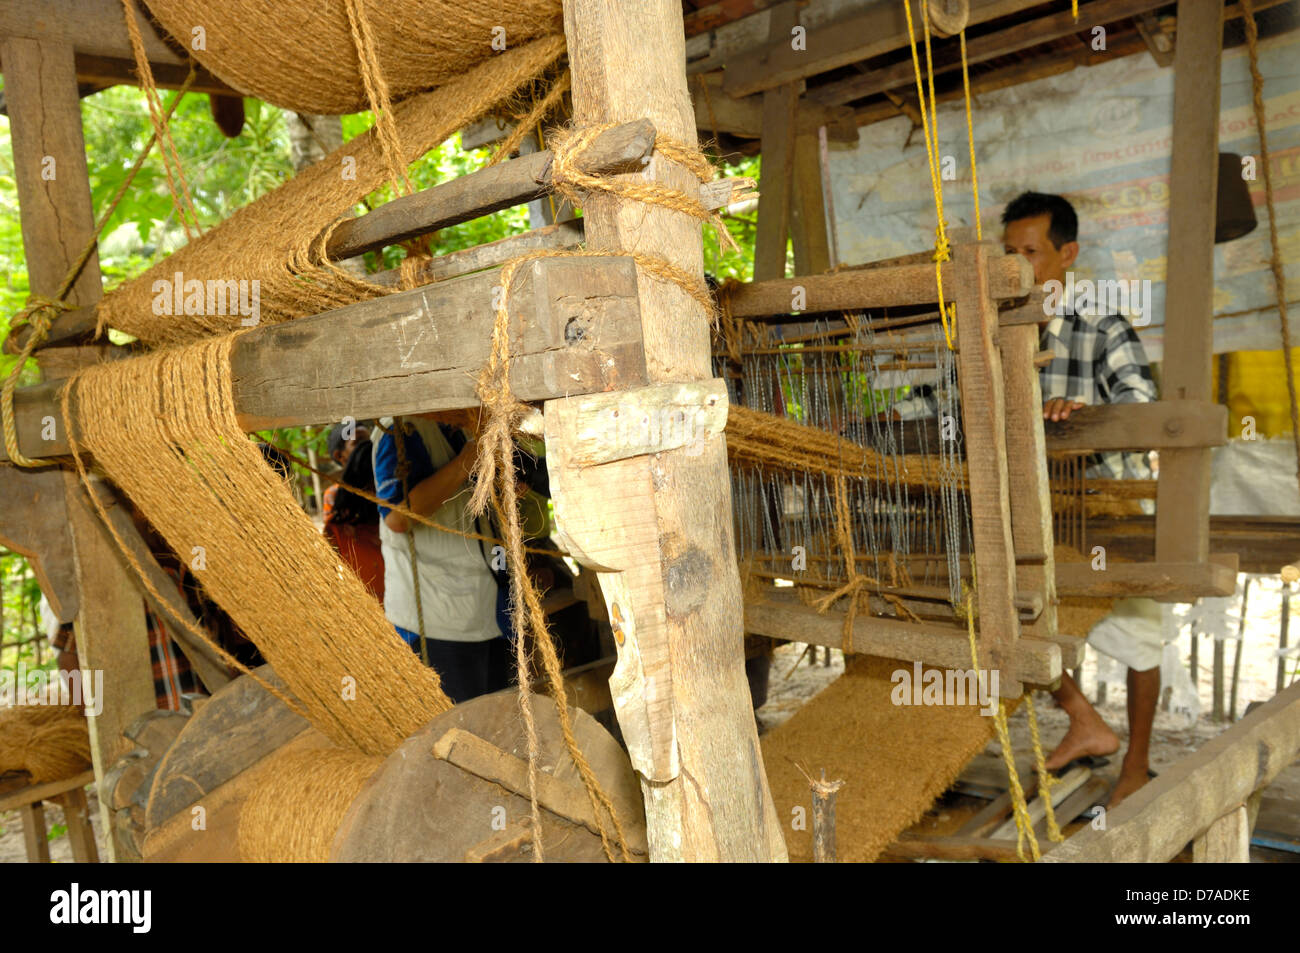 Wooden loom used by man producing coconut fiber coir door mats in home cottage-industry, Kerala, India Stock Photo